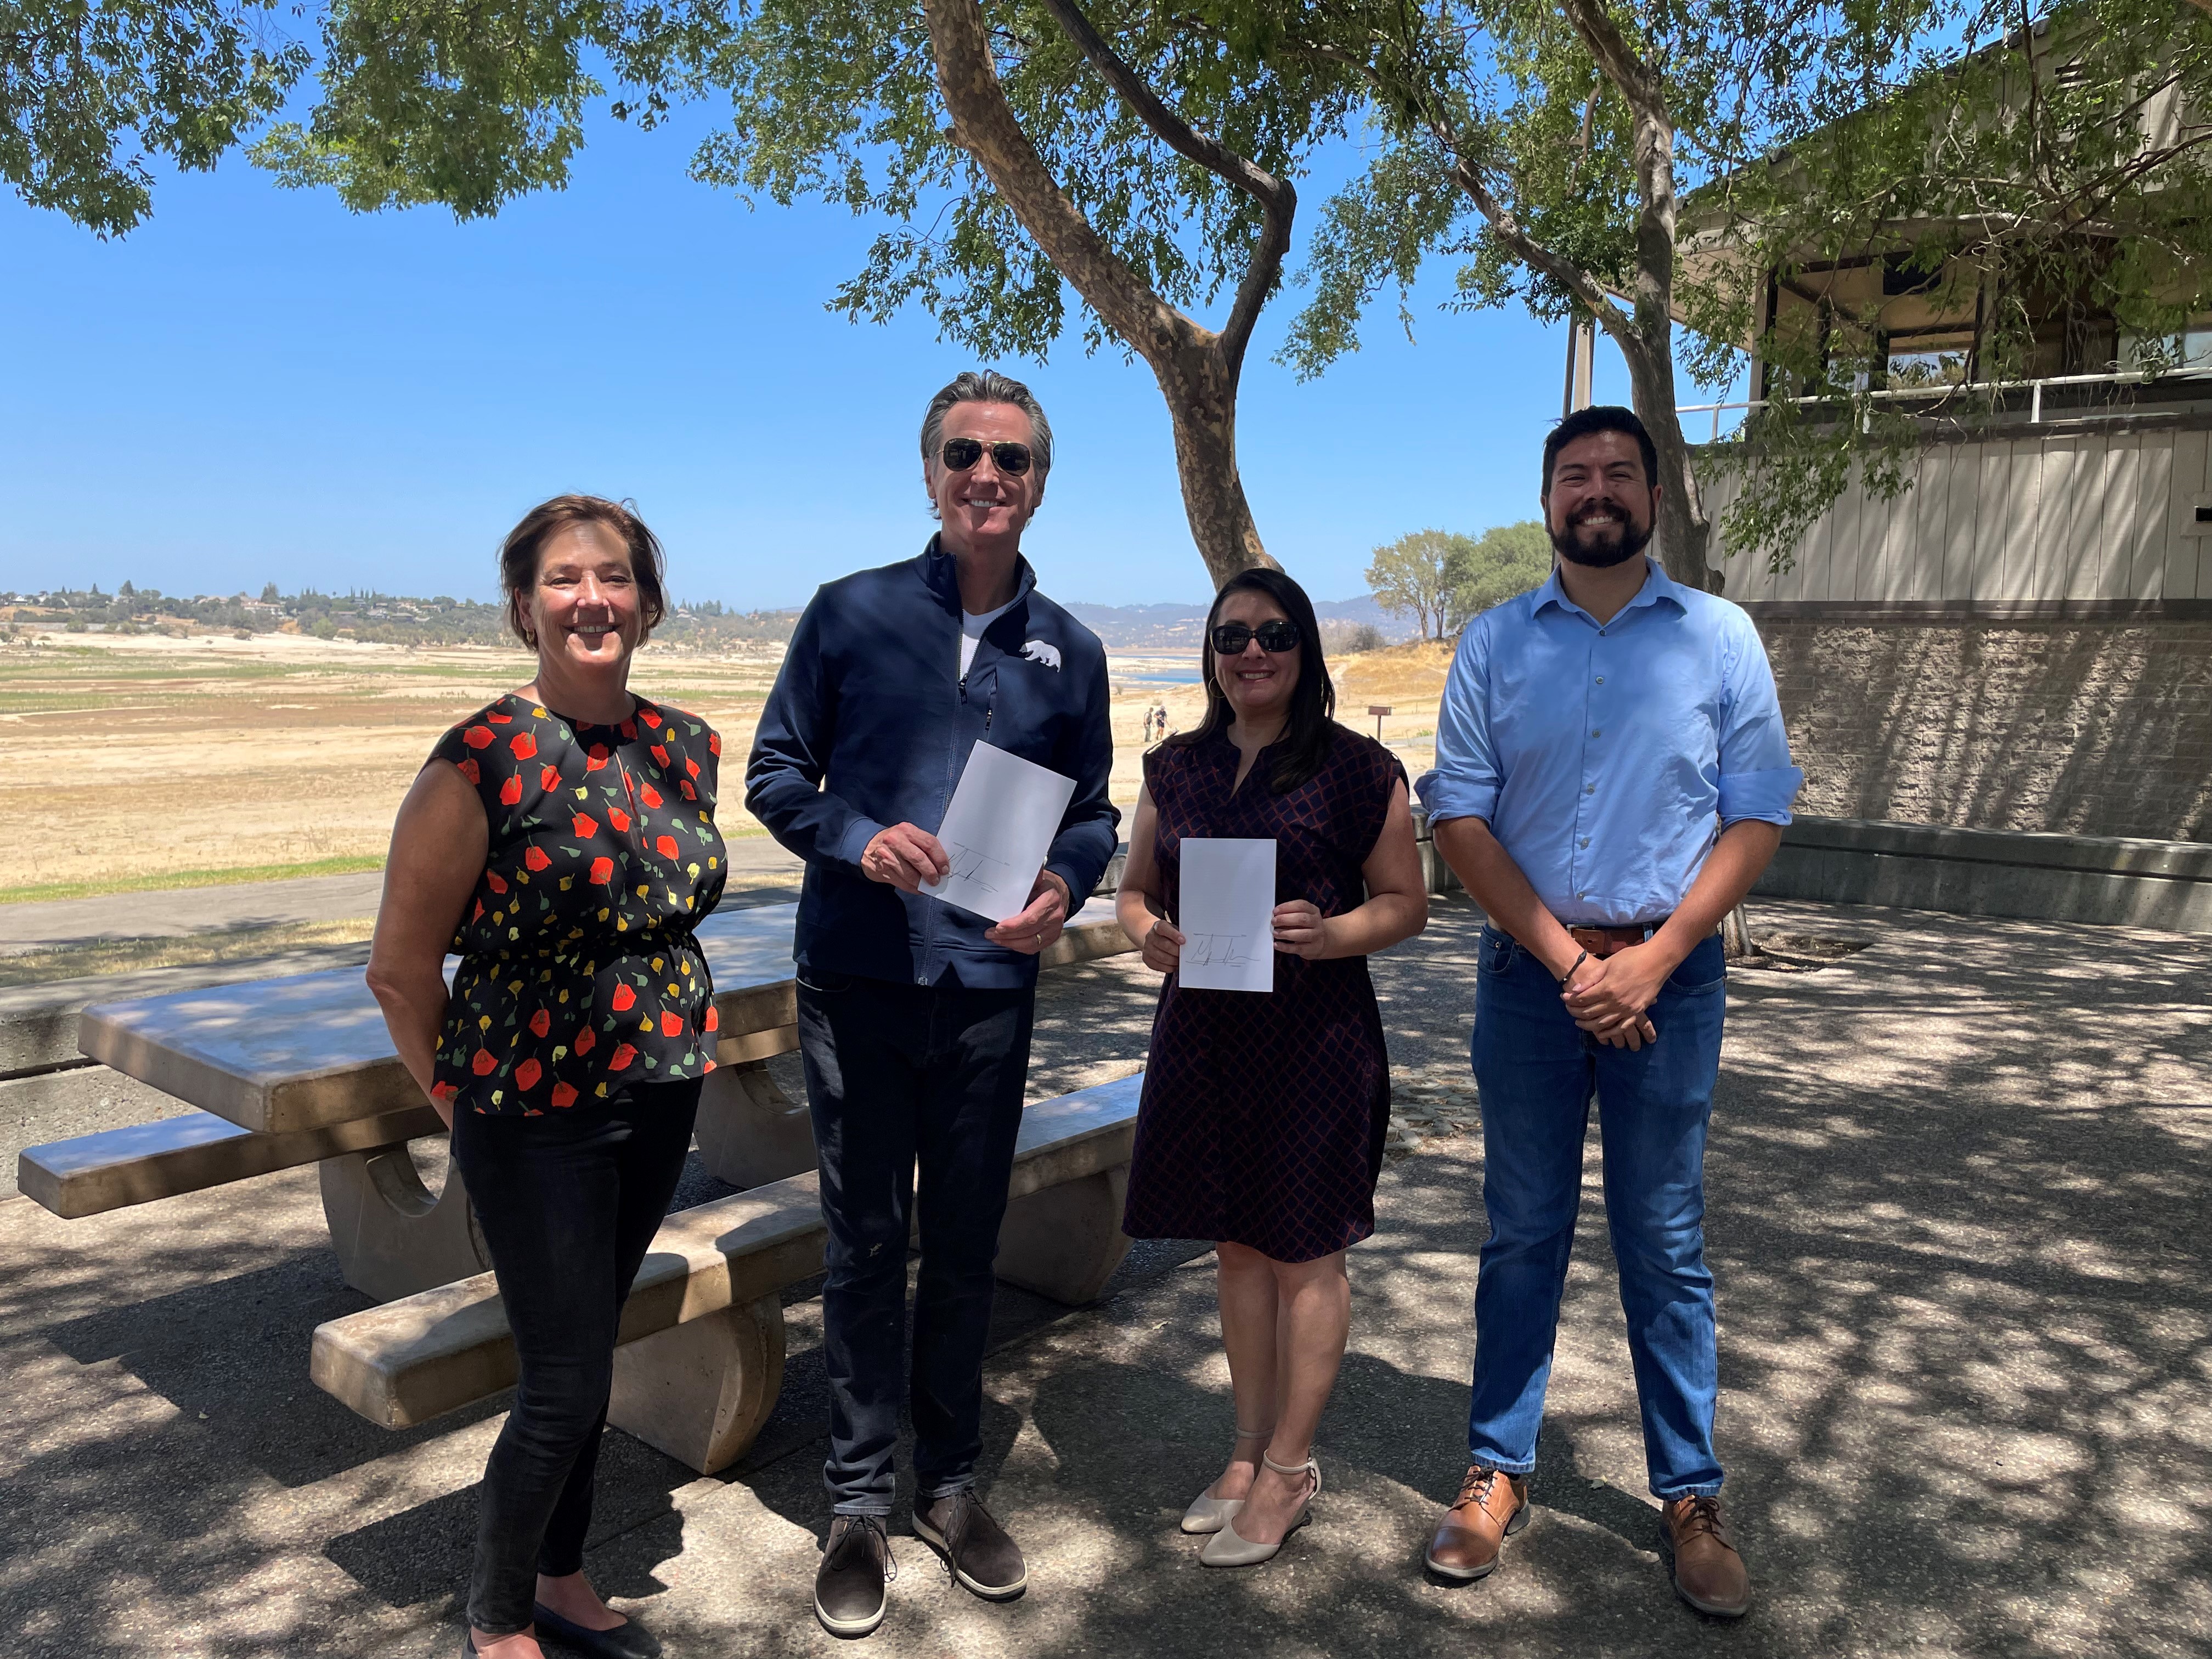 Pictured: Department of Water Resources Director Karla Nemeth, Governor Gavin Newsom, Assemblywoman Luz Rivas, and State Water Resources Control Board Chair Joaquin Esquivel following the AB 148 bill signing at the Folsom Lake reservoir.